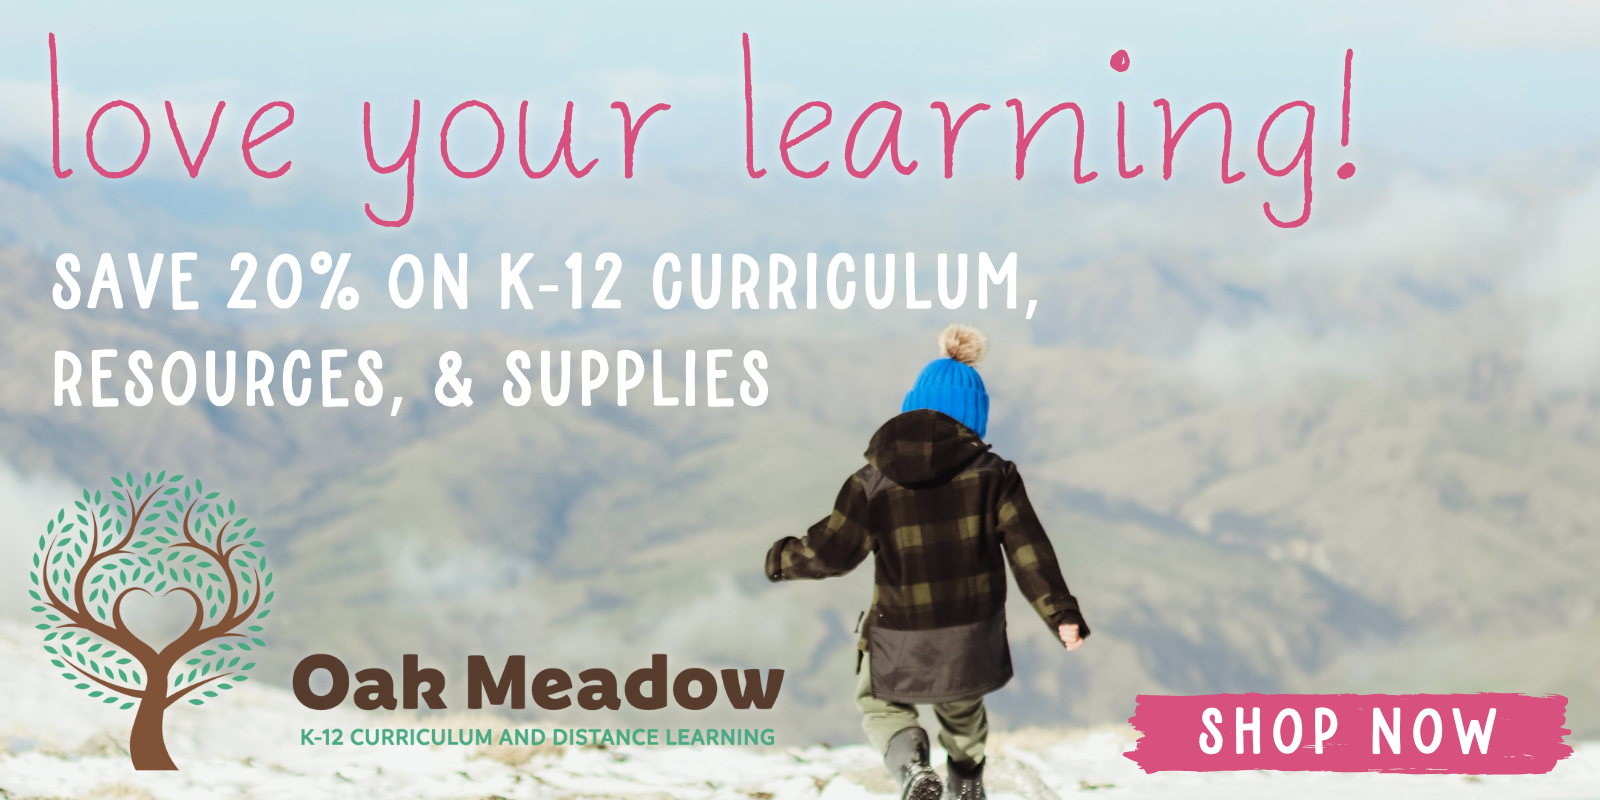 Love your learning! Oak Meadow's K-12 homeschooling curriculum provides a comprehensive educational experience, delivered with imagination and heart. The curriculum includes weekly lesson plans for an entire year and can be customized to meet your student's needs and interests. Take 20% off all Oak Meadow's bookstore items from February 14-28, 2022. Purchase complete curriculum packages for PreK-8 or individual courses for high school, or purchase craft supplies, homeschooling resources, books, and more. Plus, they're offering free shipping on all orders over $499! Shop February 14-28, 2022, at oakmeadowbookstore.com.